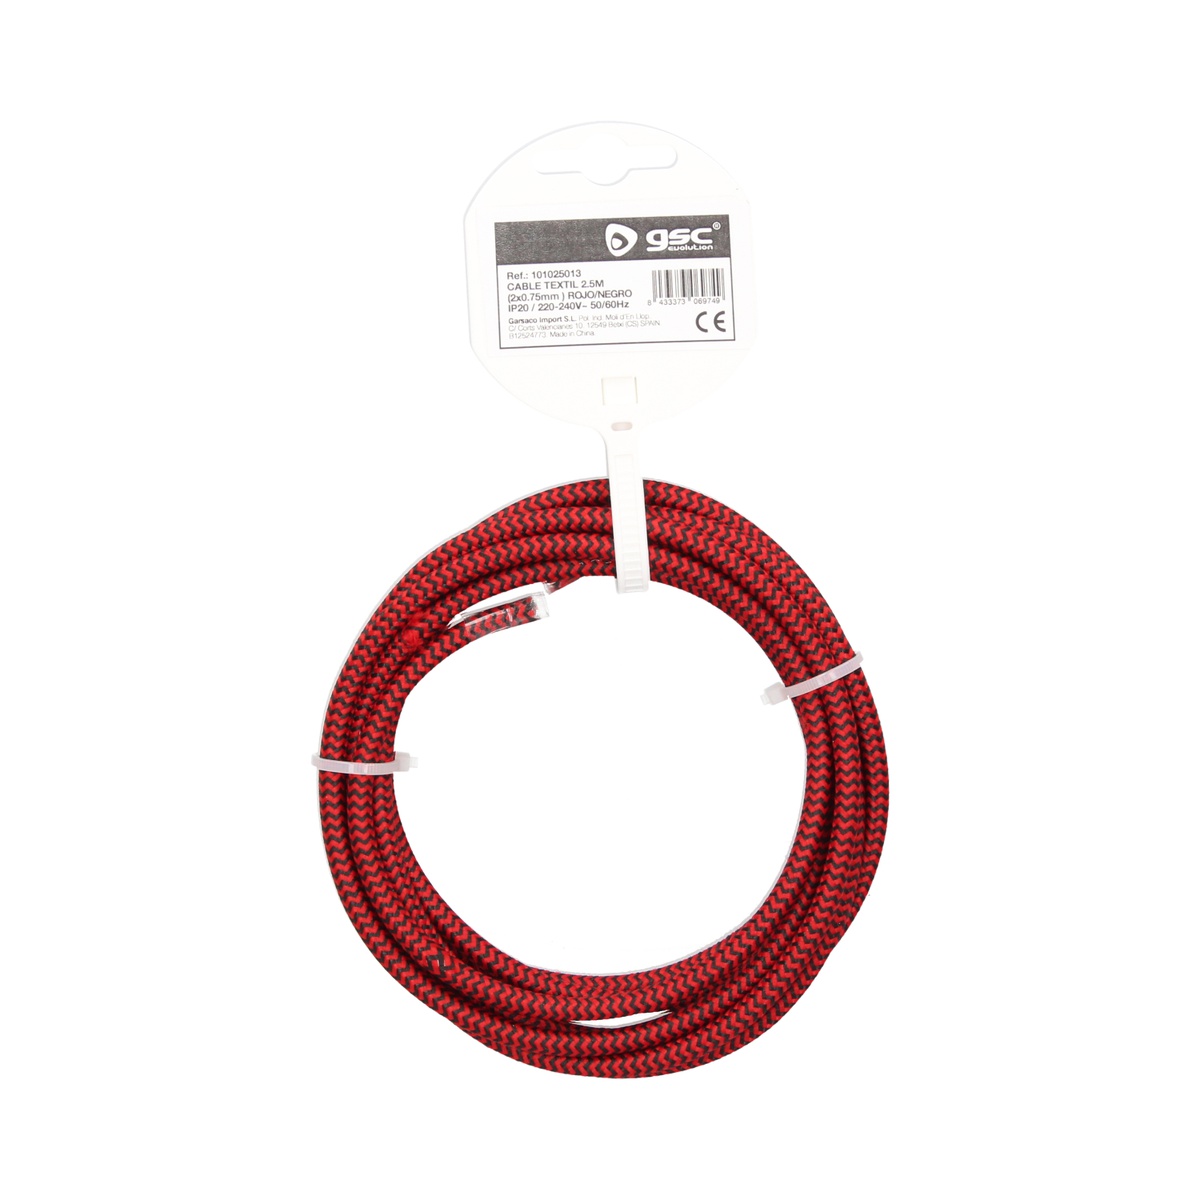 2.5m textile cable (2x0.75mm) red